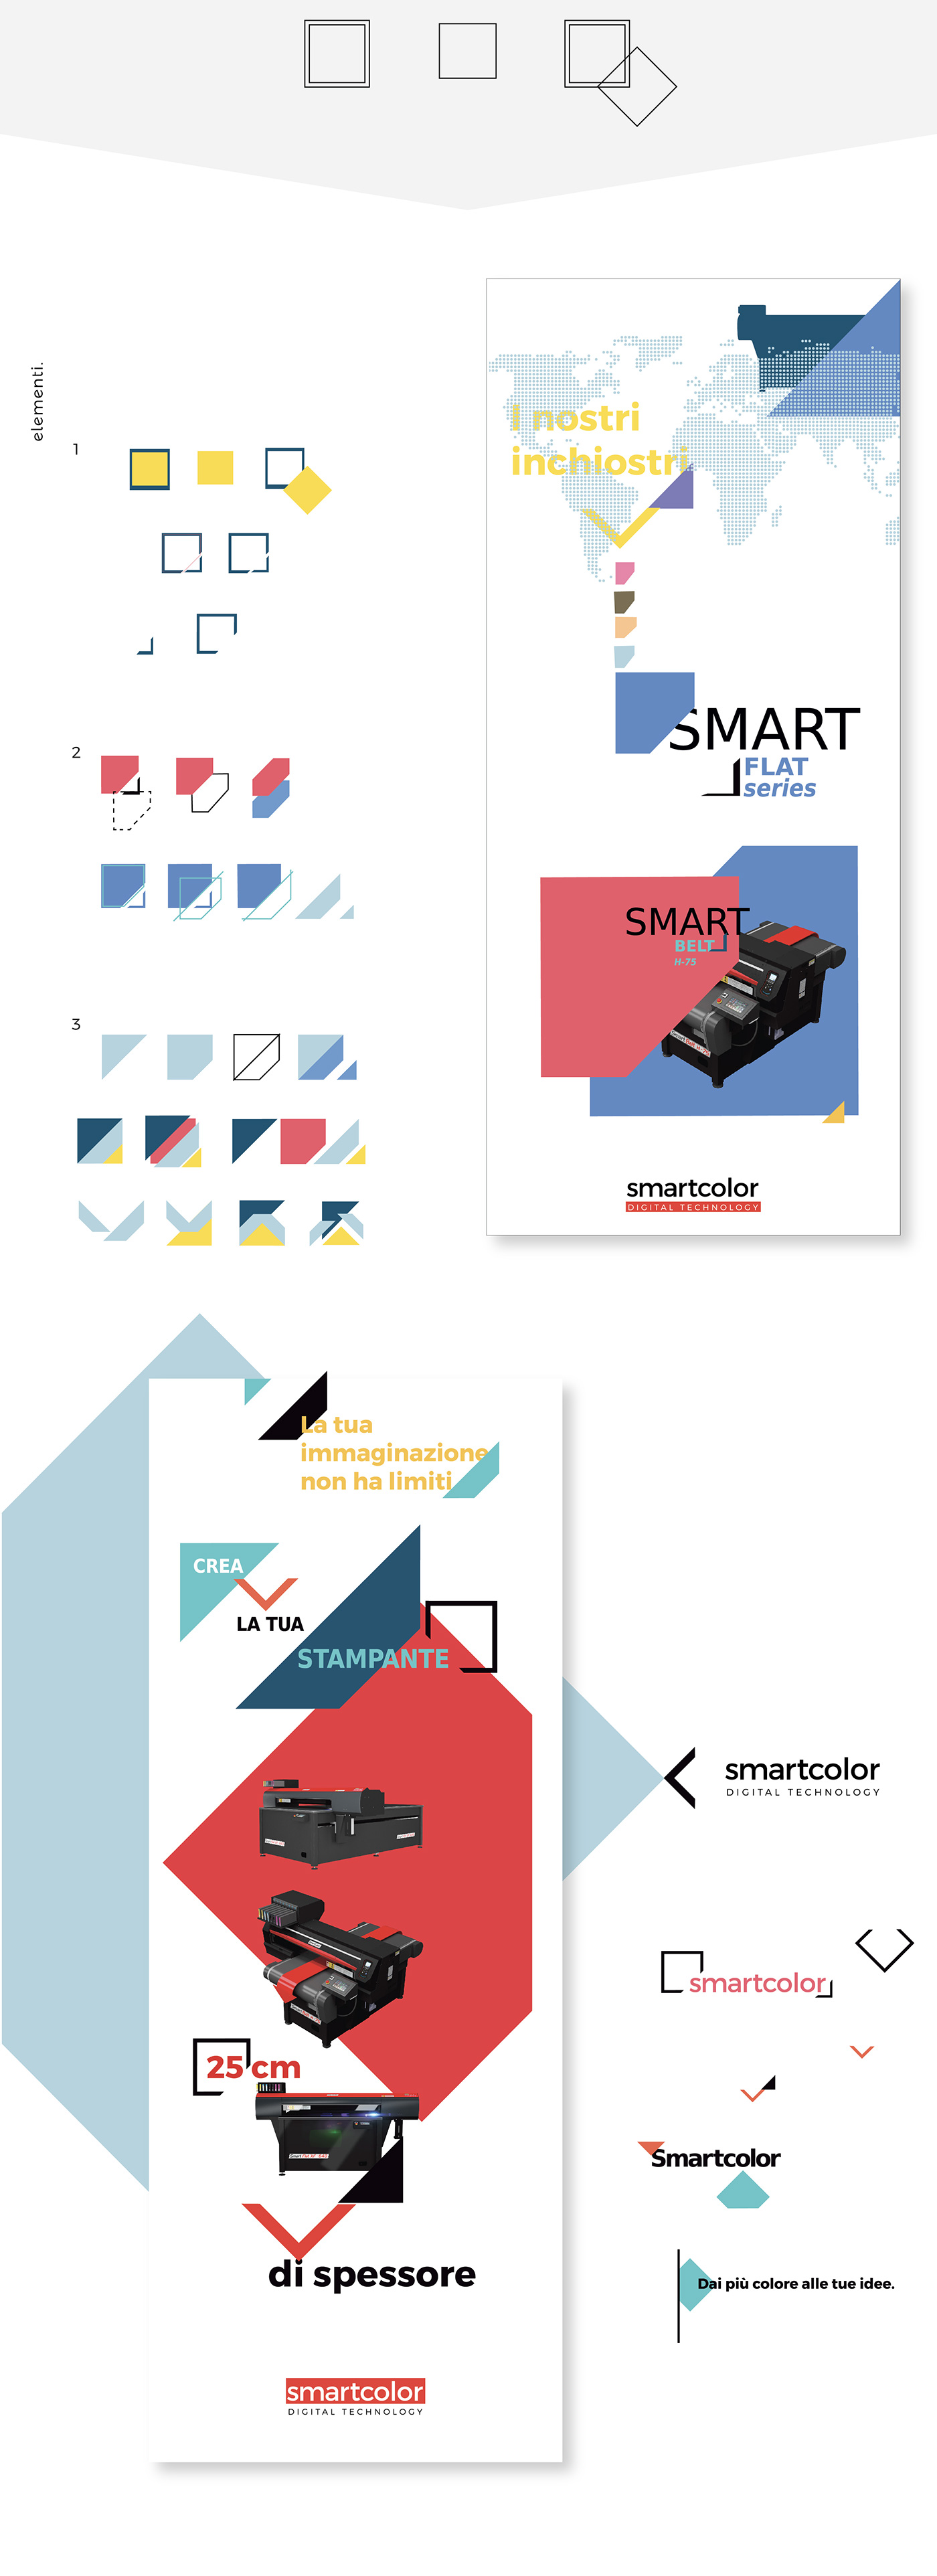 stampa plotter tecnologia visual siteweb corporate graphic shapes Claim payoff